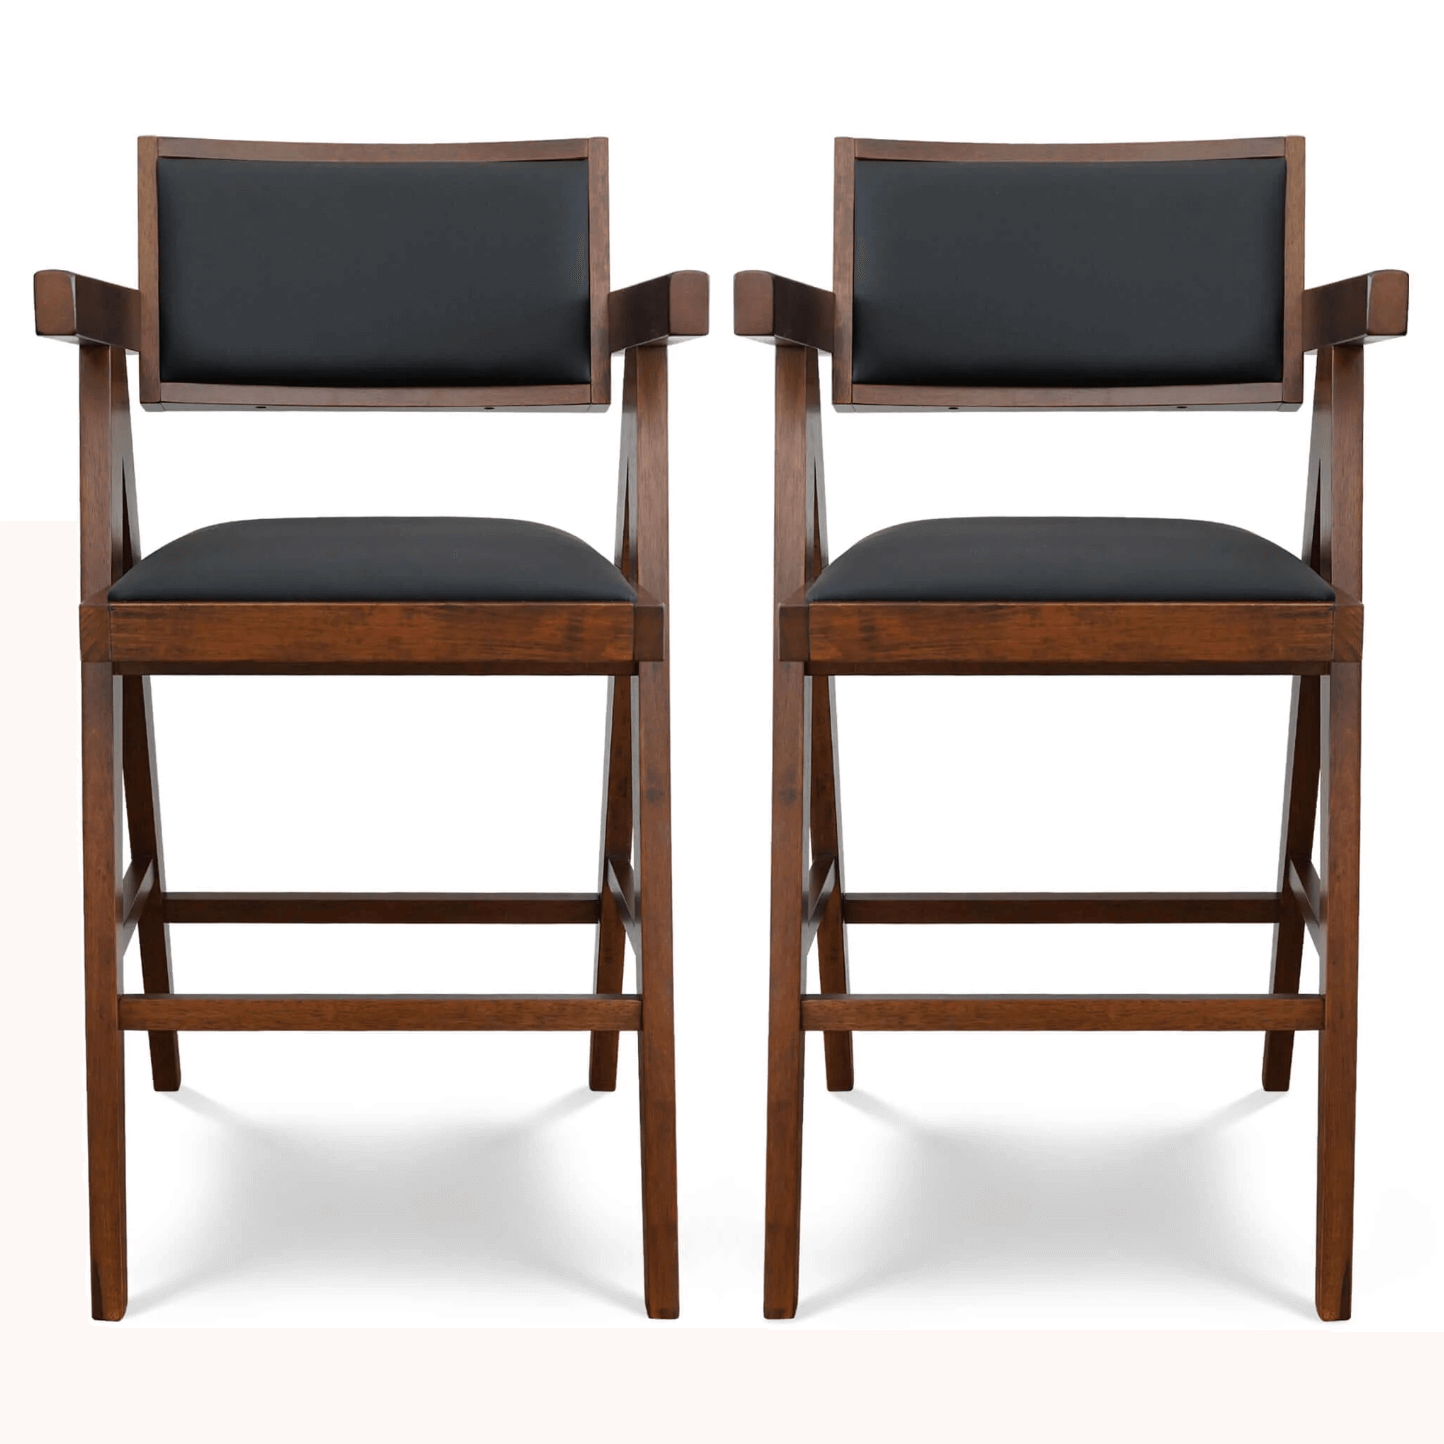 Athena Solid Wood Counter Chairs With Armrests & Black Vegan Leather, Set of 2 - Revel Sofa 